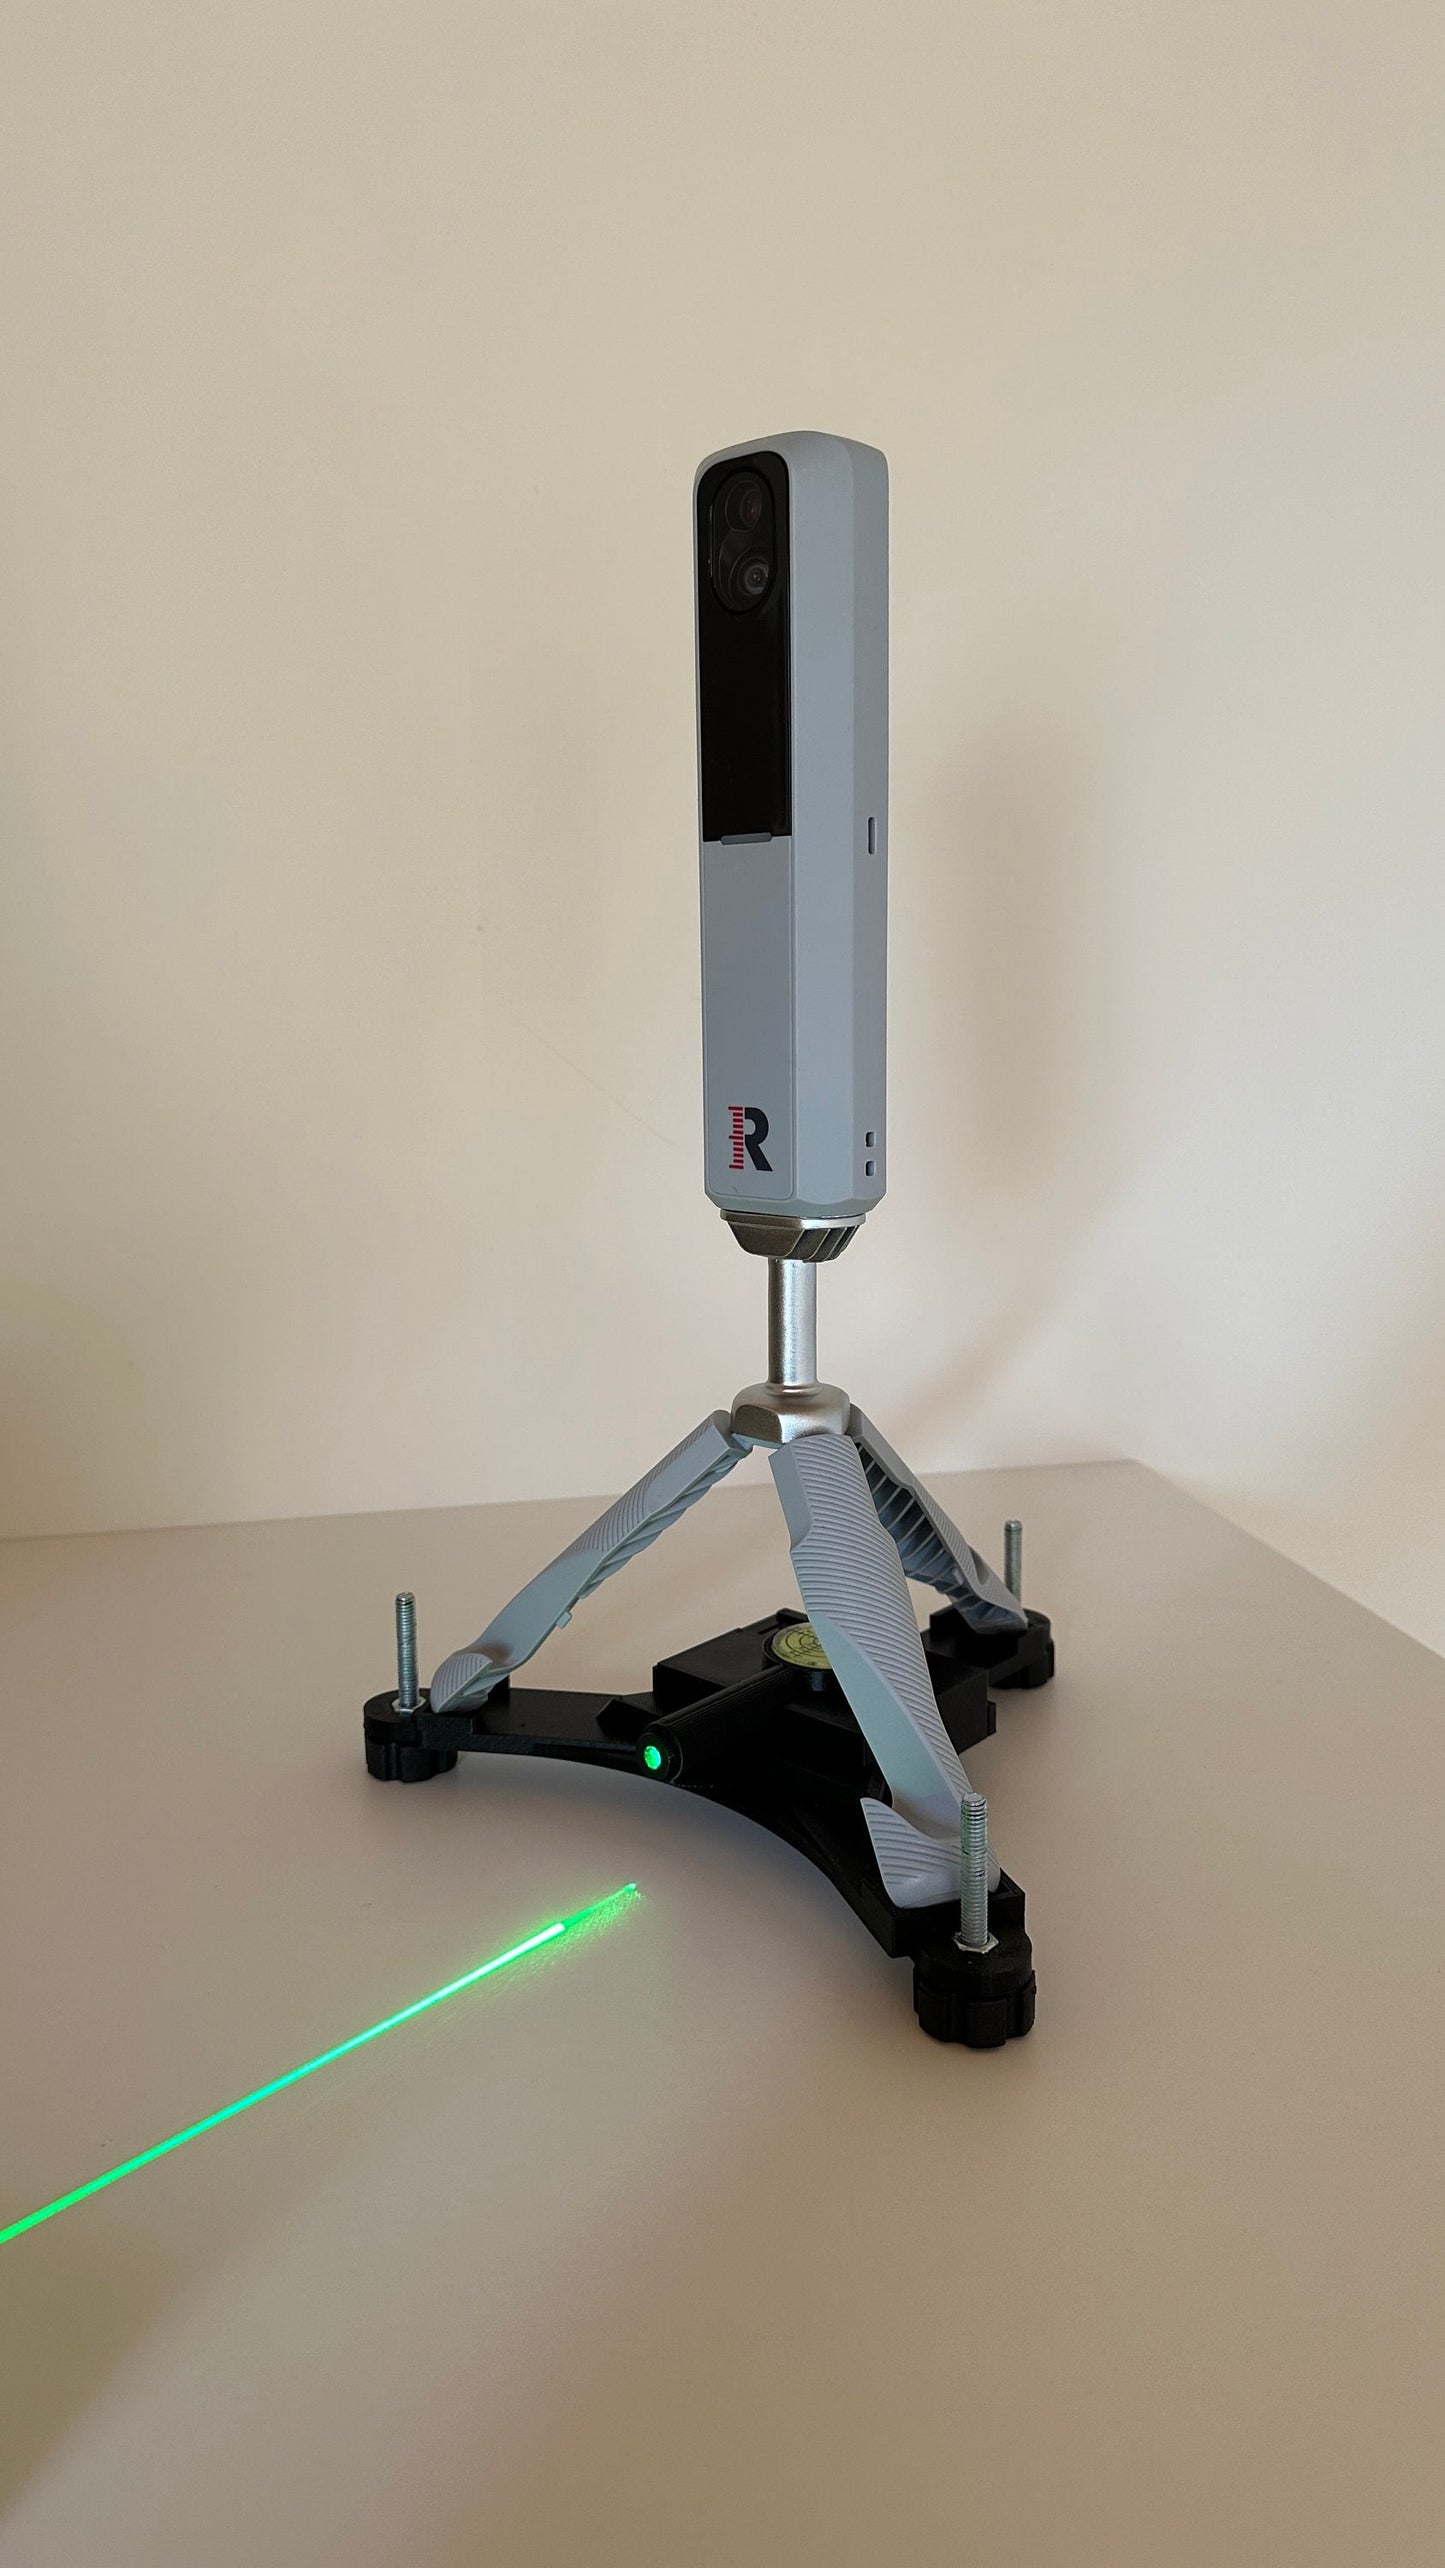 Rechargeable Rapsodo MLM 2 Pro alignment tool (Red or Green laser)